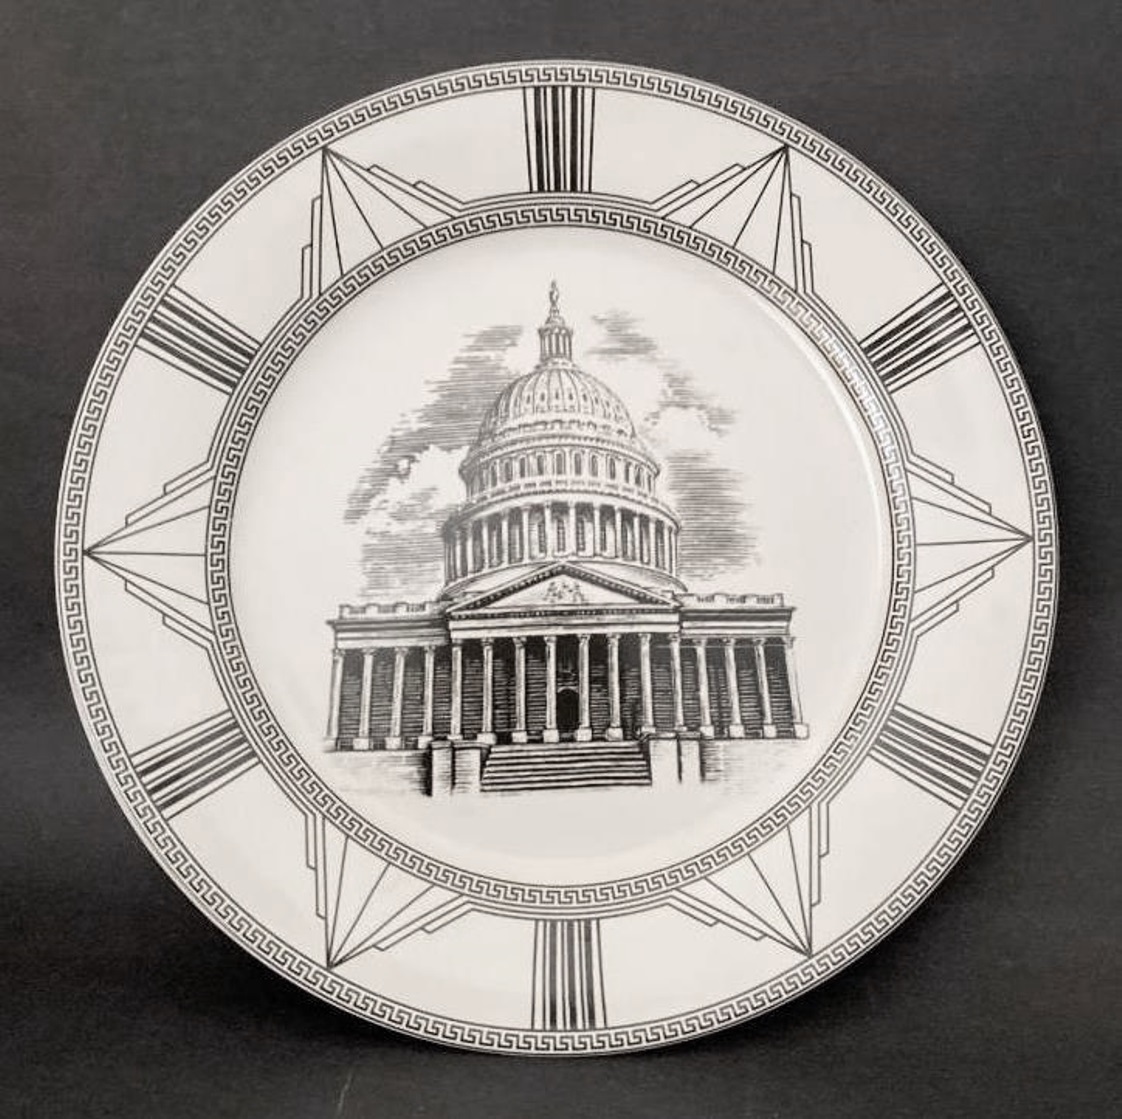 Royal Norfolk THE WHITE HOUSE decorative collectible plate 7-1/4 inches diameter - $14.99